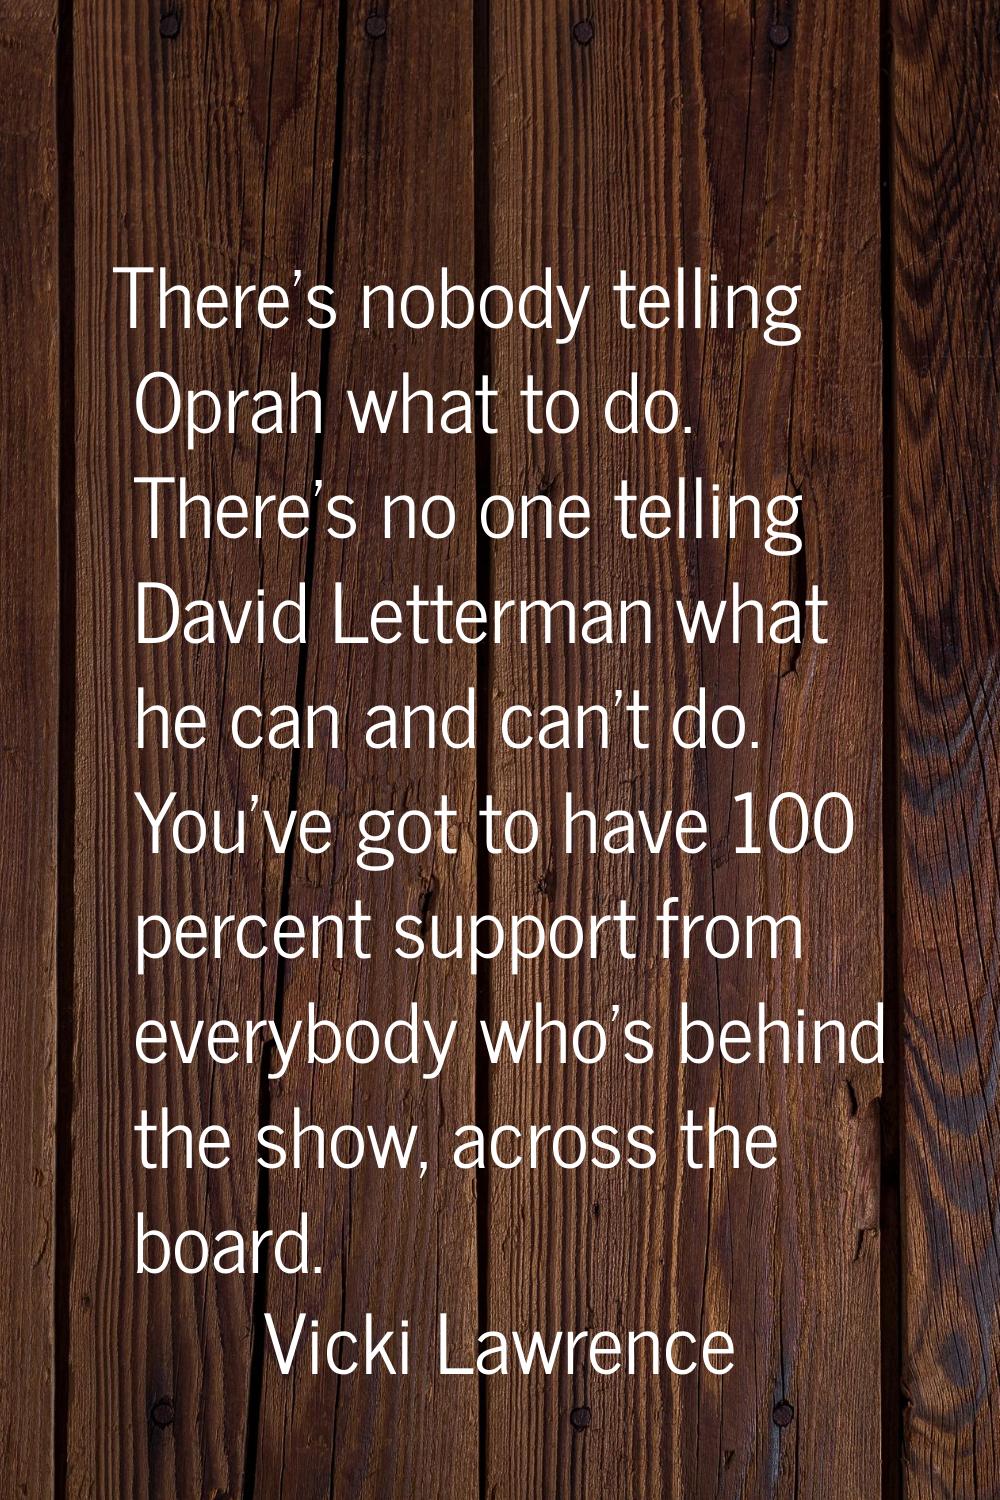 There's nobody telling Oprah what to do. There's no one telling David Letterman what he can and can